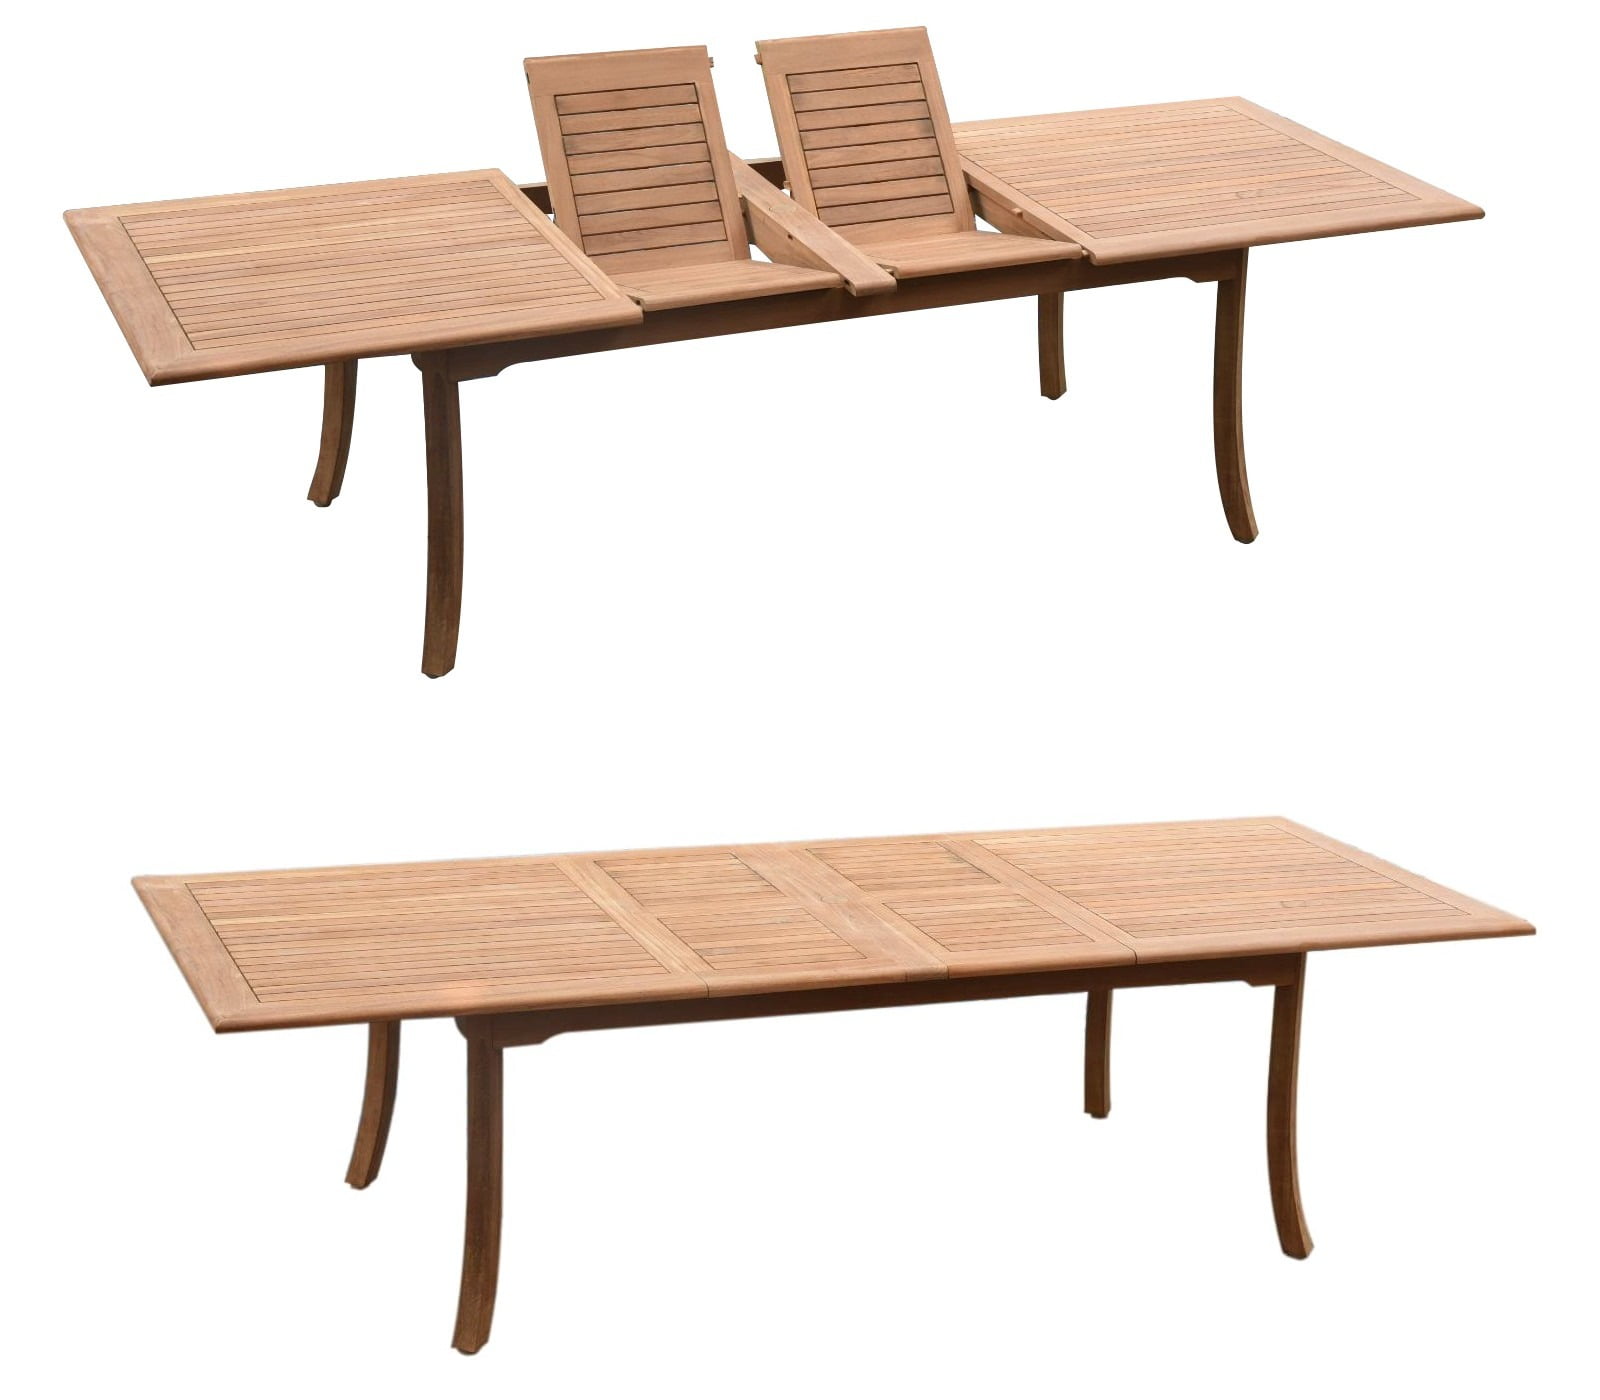 Patio Dining Table DellaTeak Finish Rectangle Wood Outdoor Outdoor Furniture New 